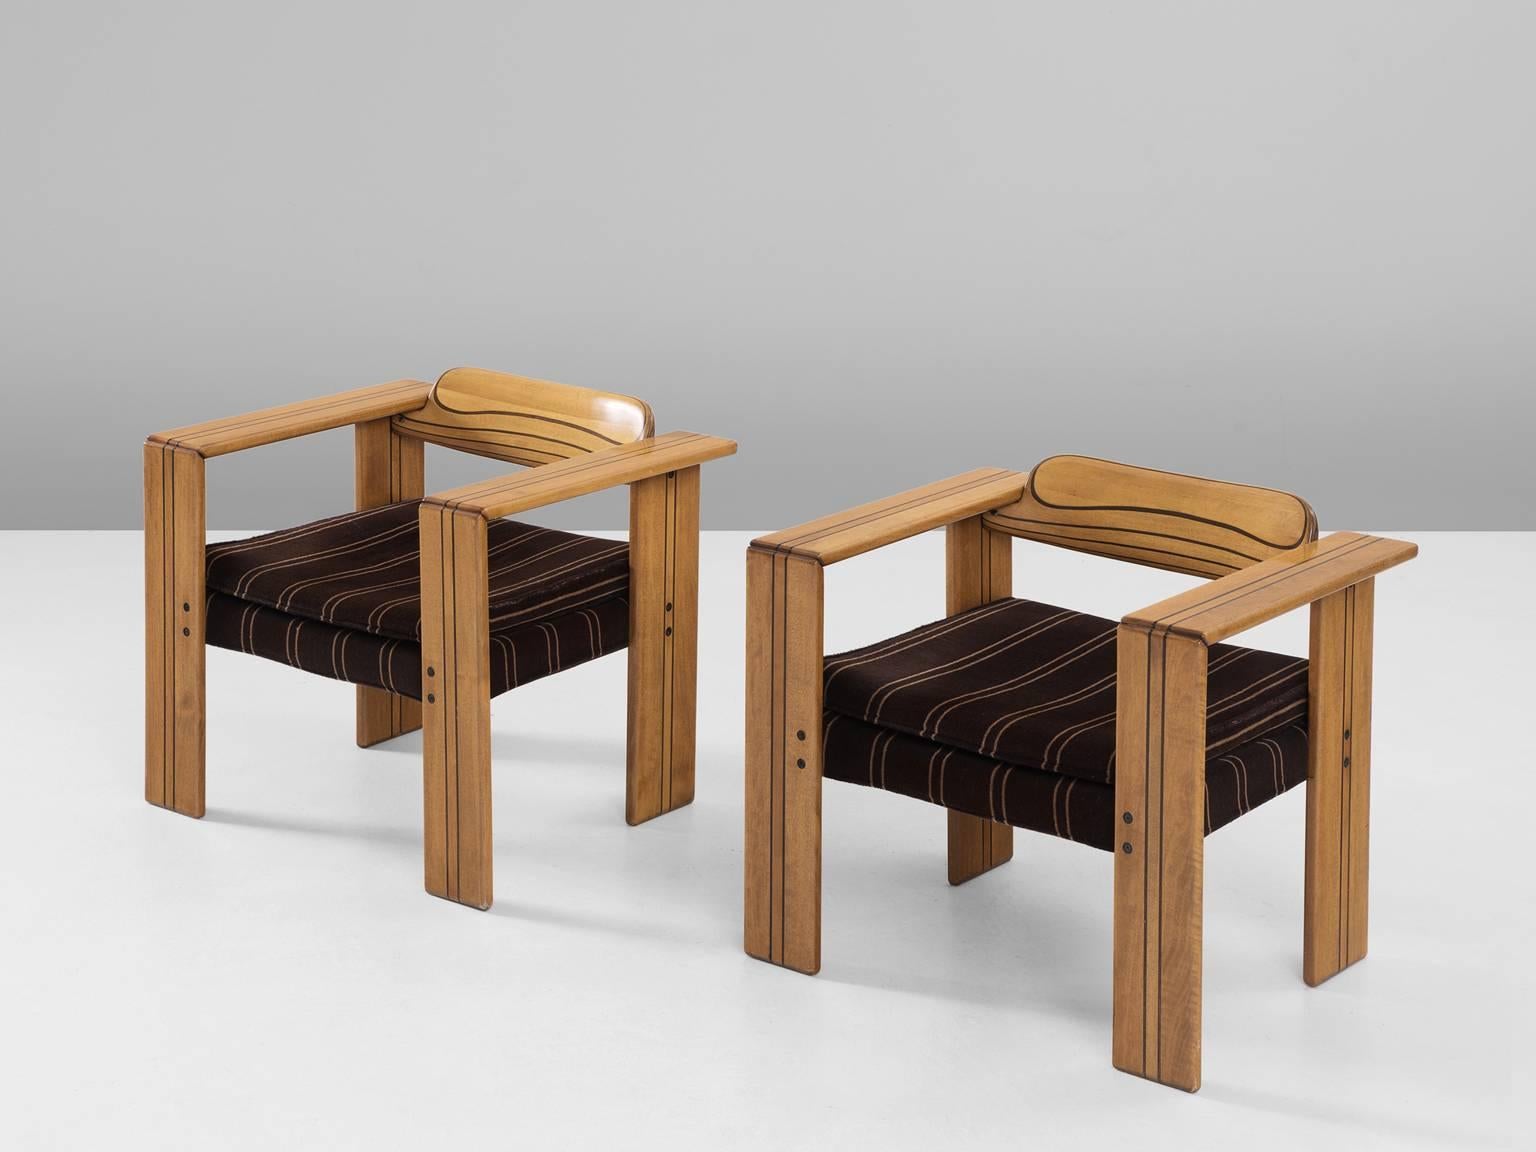 Set of two 'Artona' armchairs, in walnut and fabric, by Afra & Tobia Scarpa for Maxalto, Italy 1975.

Pair of cubic Artona lounge chairs by Italian designer couple Afra and Tobia Scarpa. These chairs show absolute stunning craftsmanship. The